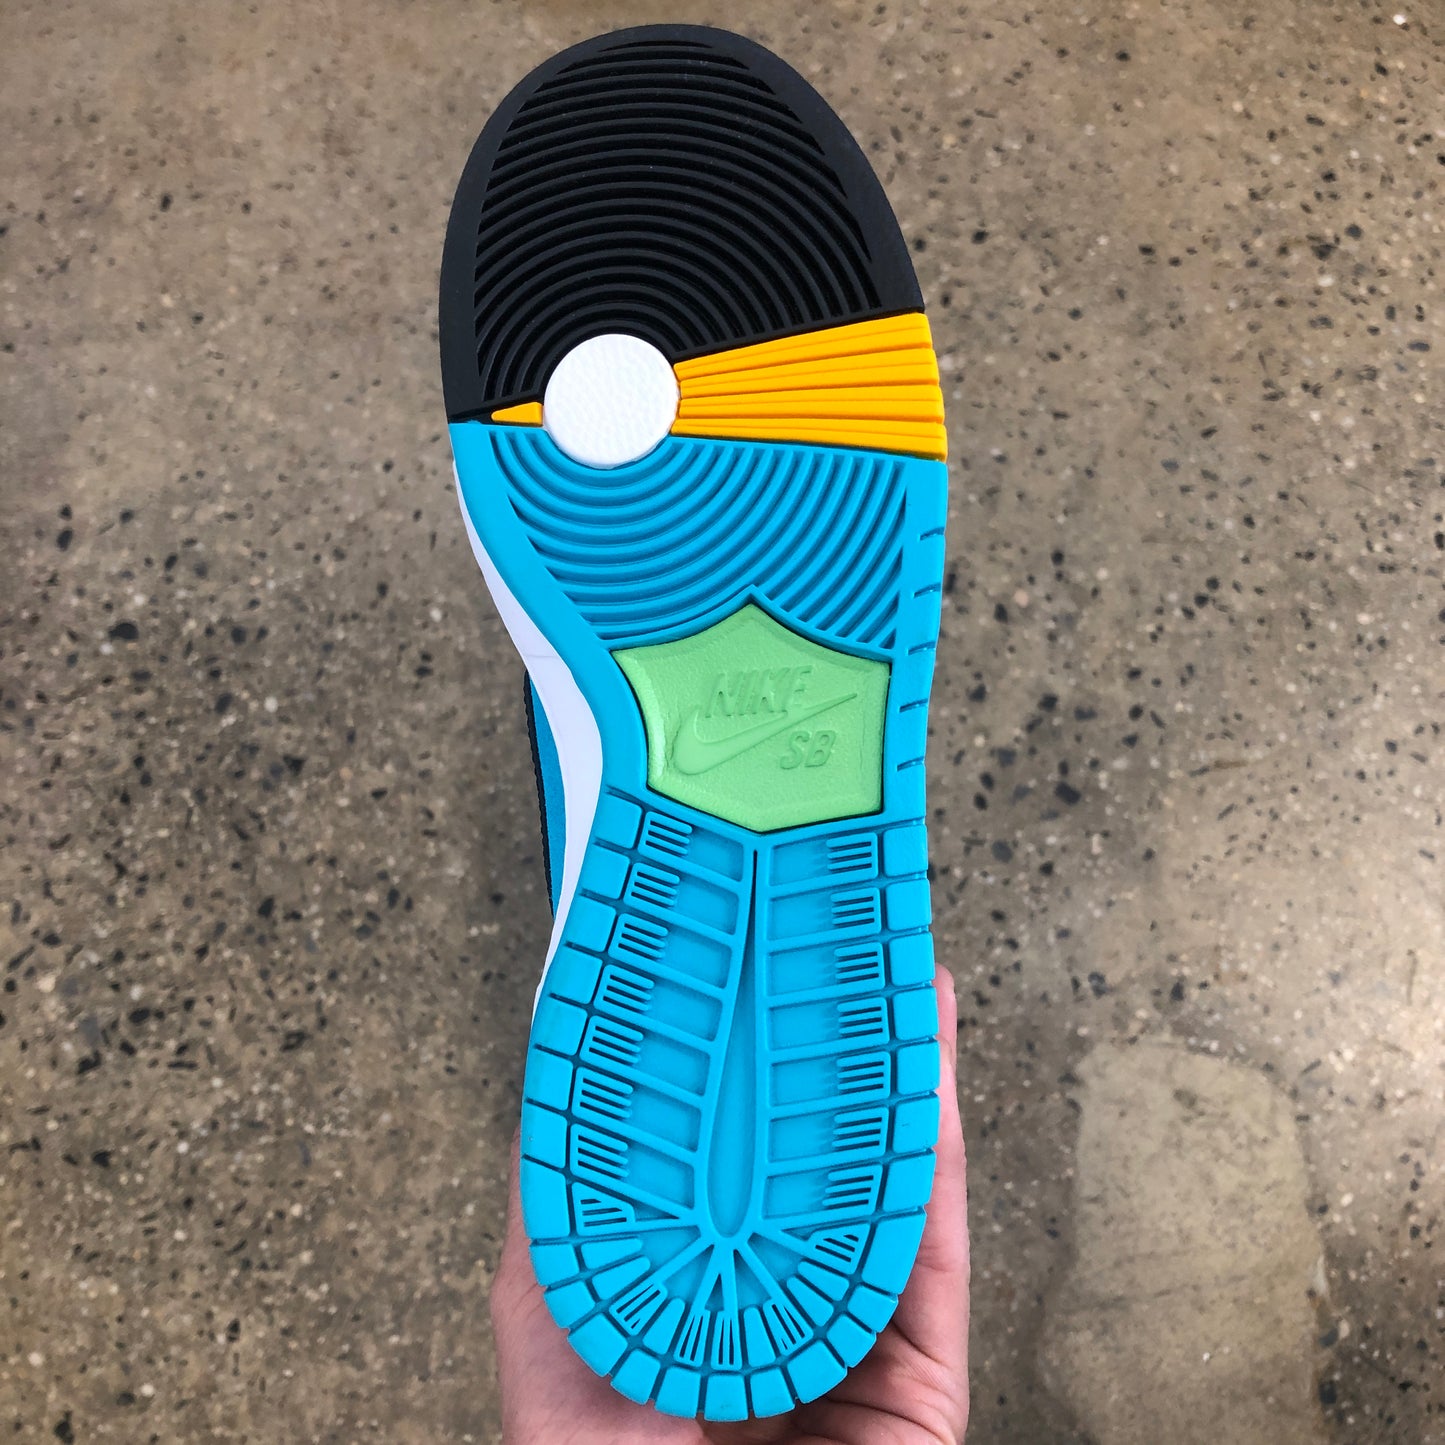 photo of the sole of the shoe, black, yellow, white, and blue coloring 